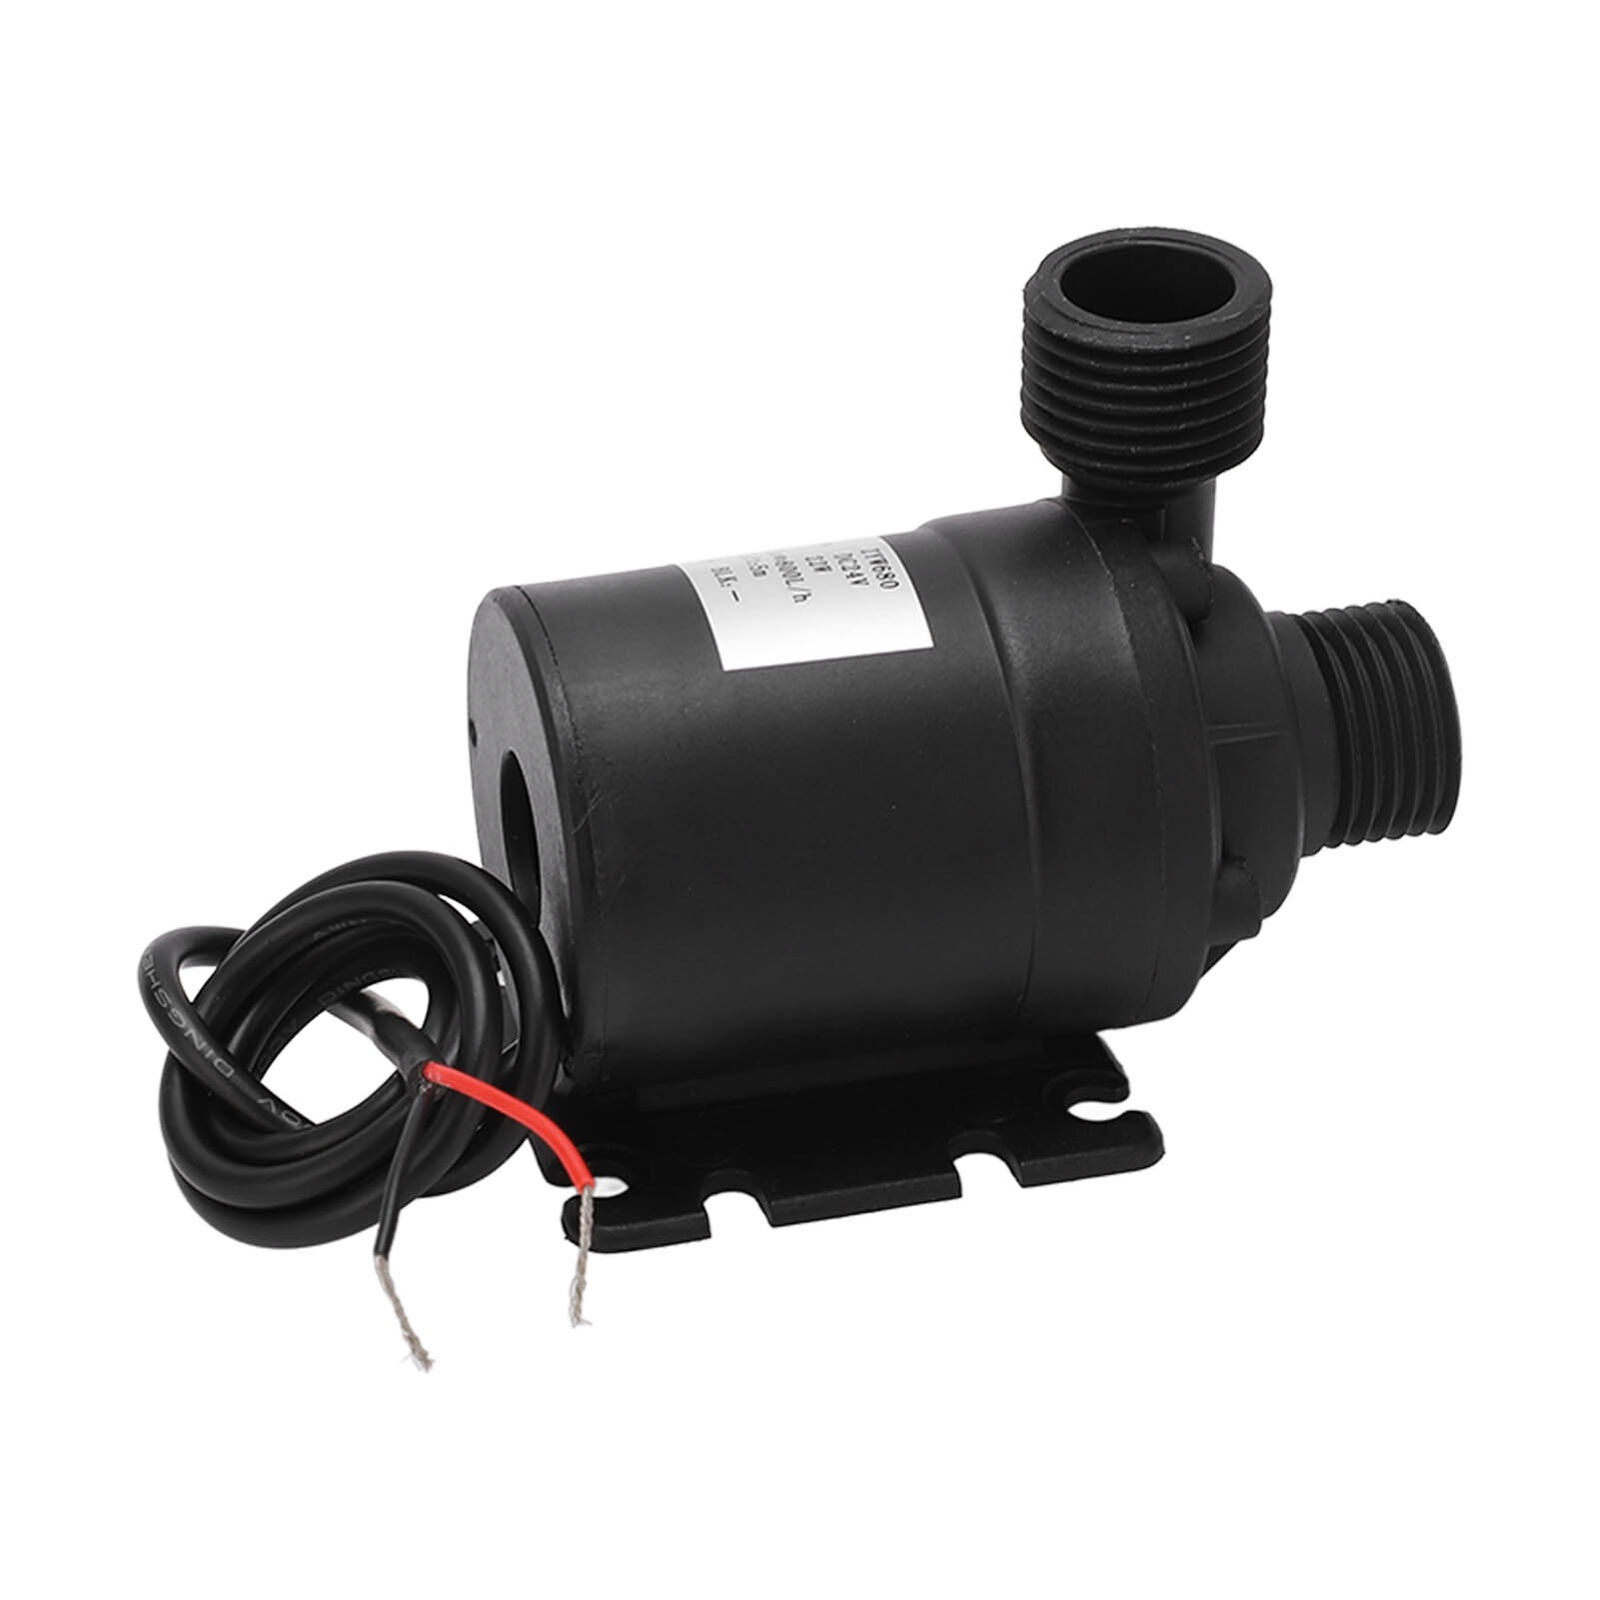 ✈DC 24V Brushless Water Pump Submersible 800L/H Flow 9500rpm IP68 Waterproof For